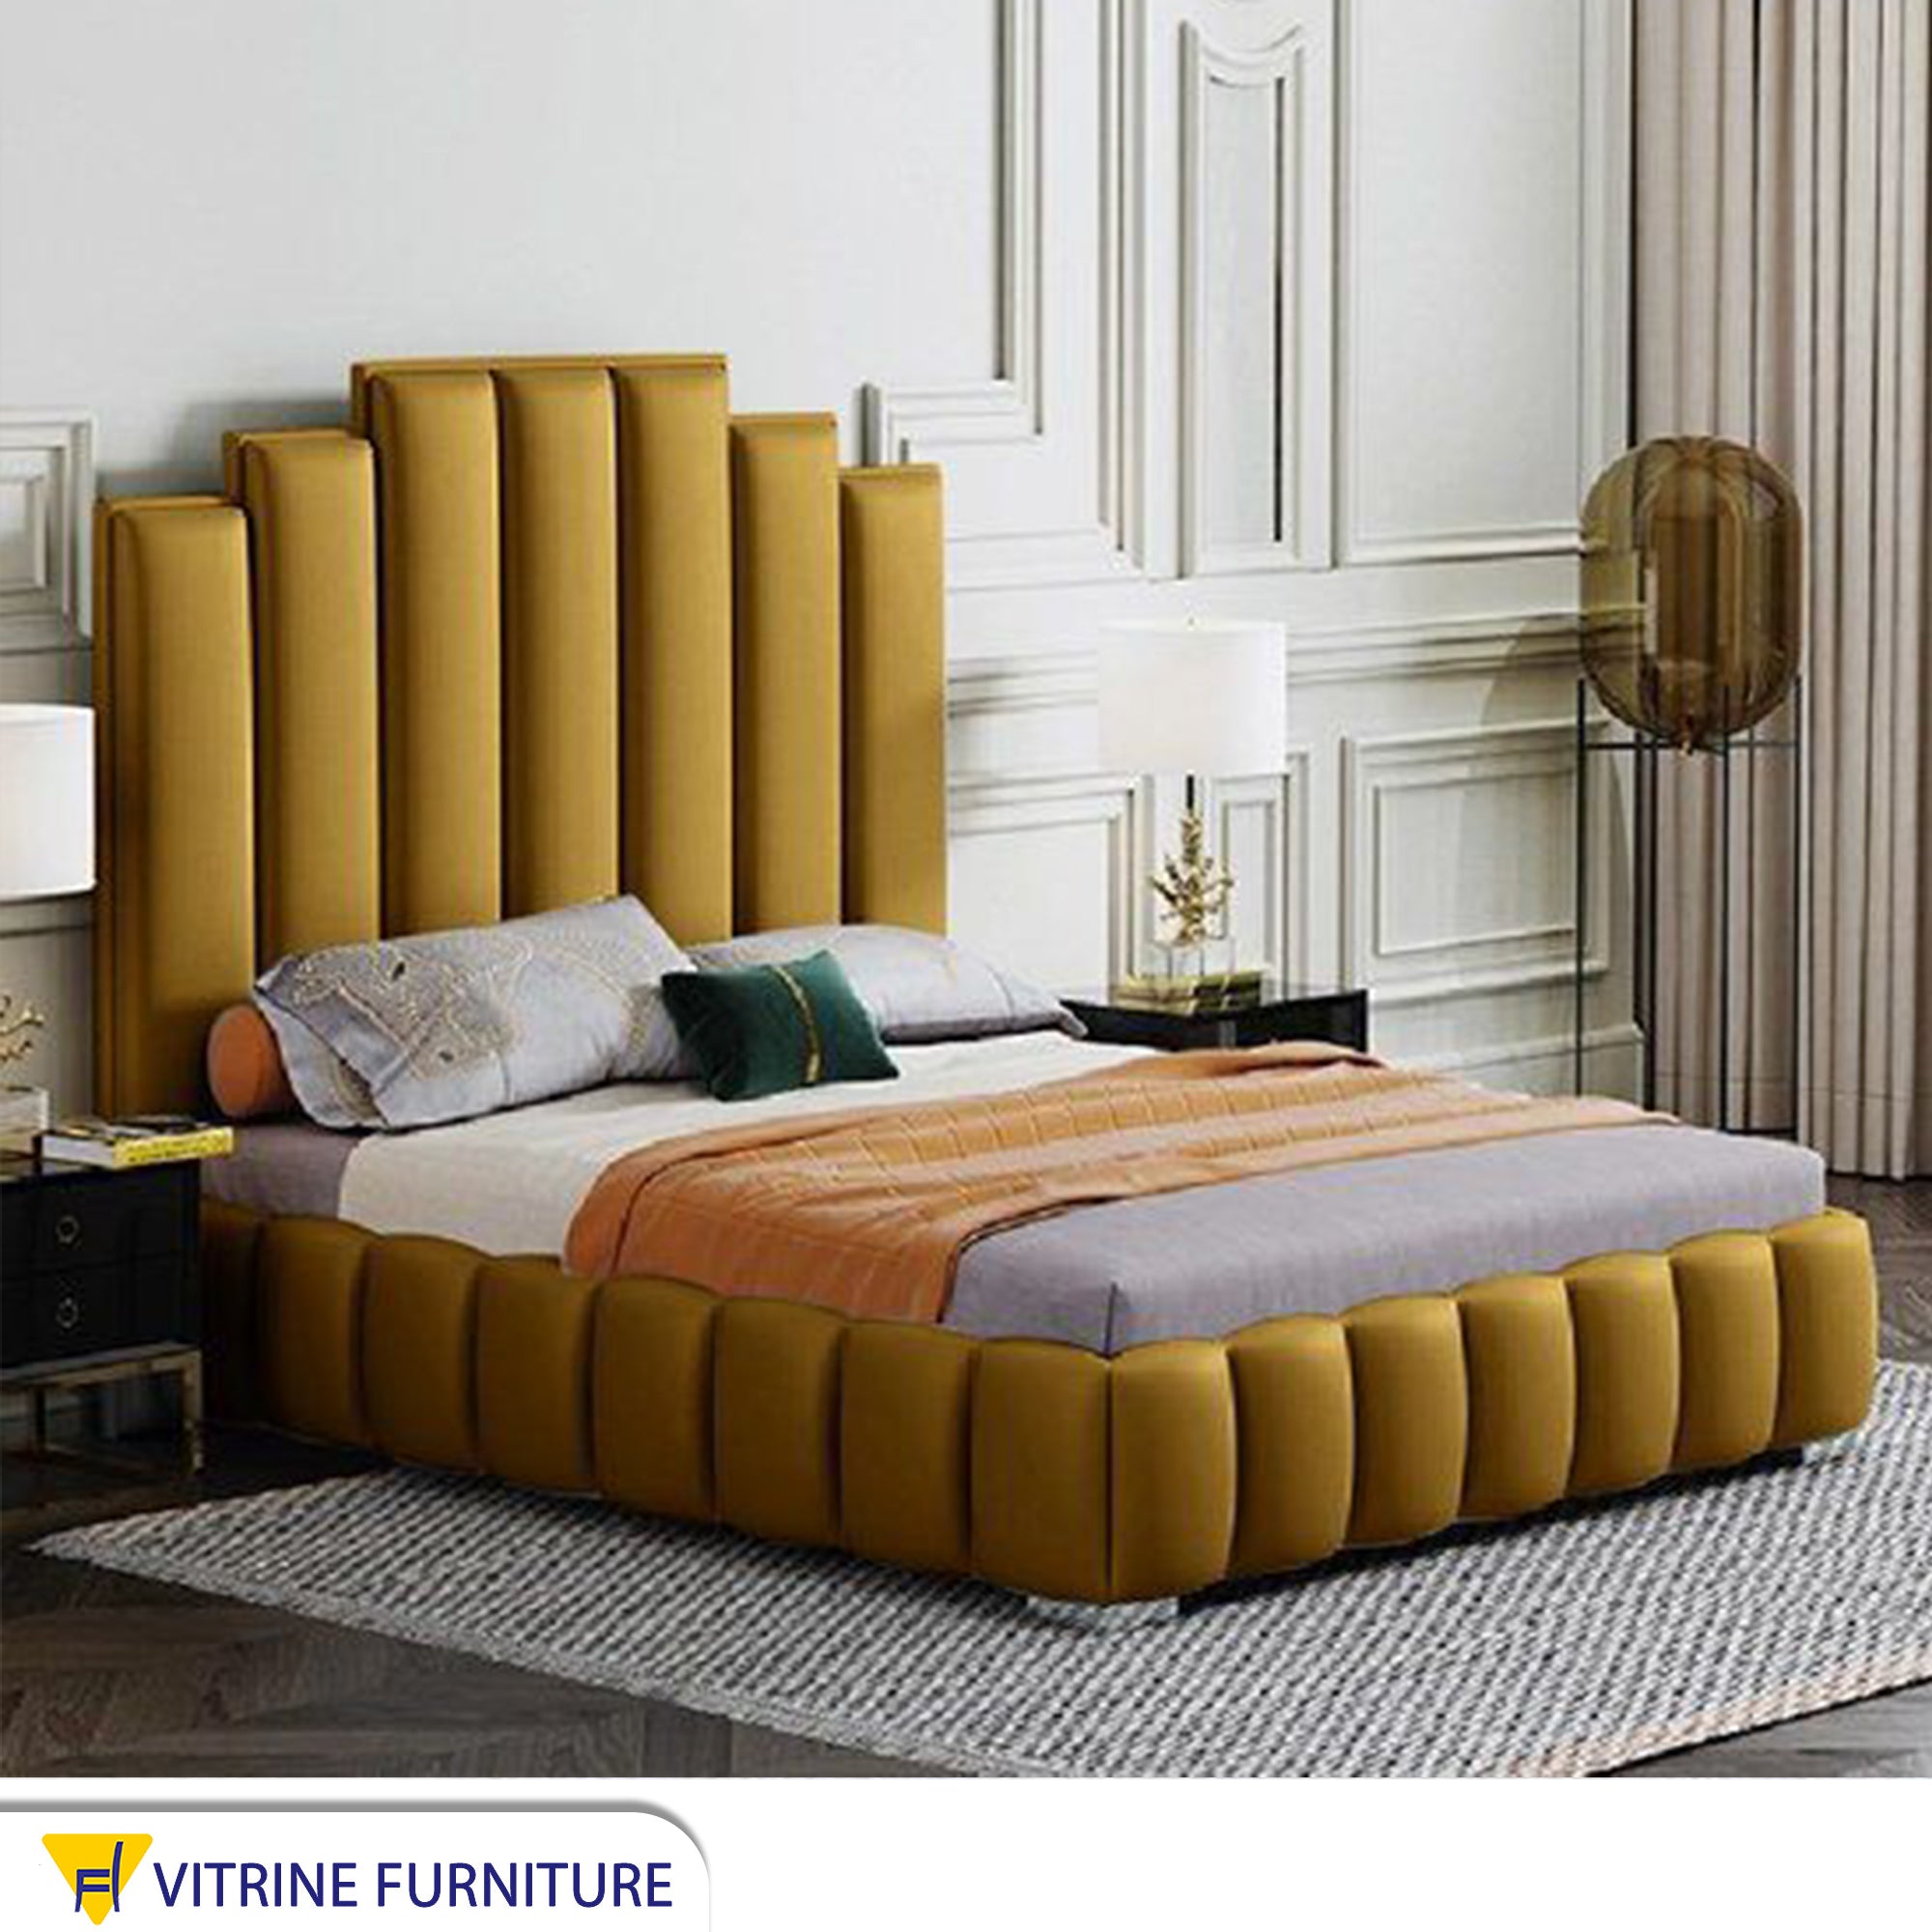 Yellow bed with a unique back